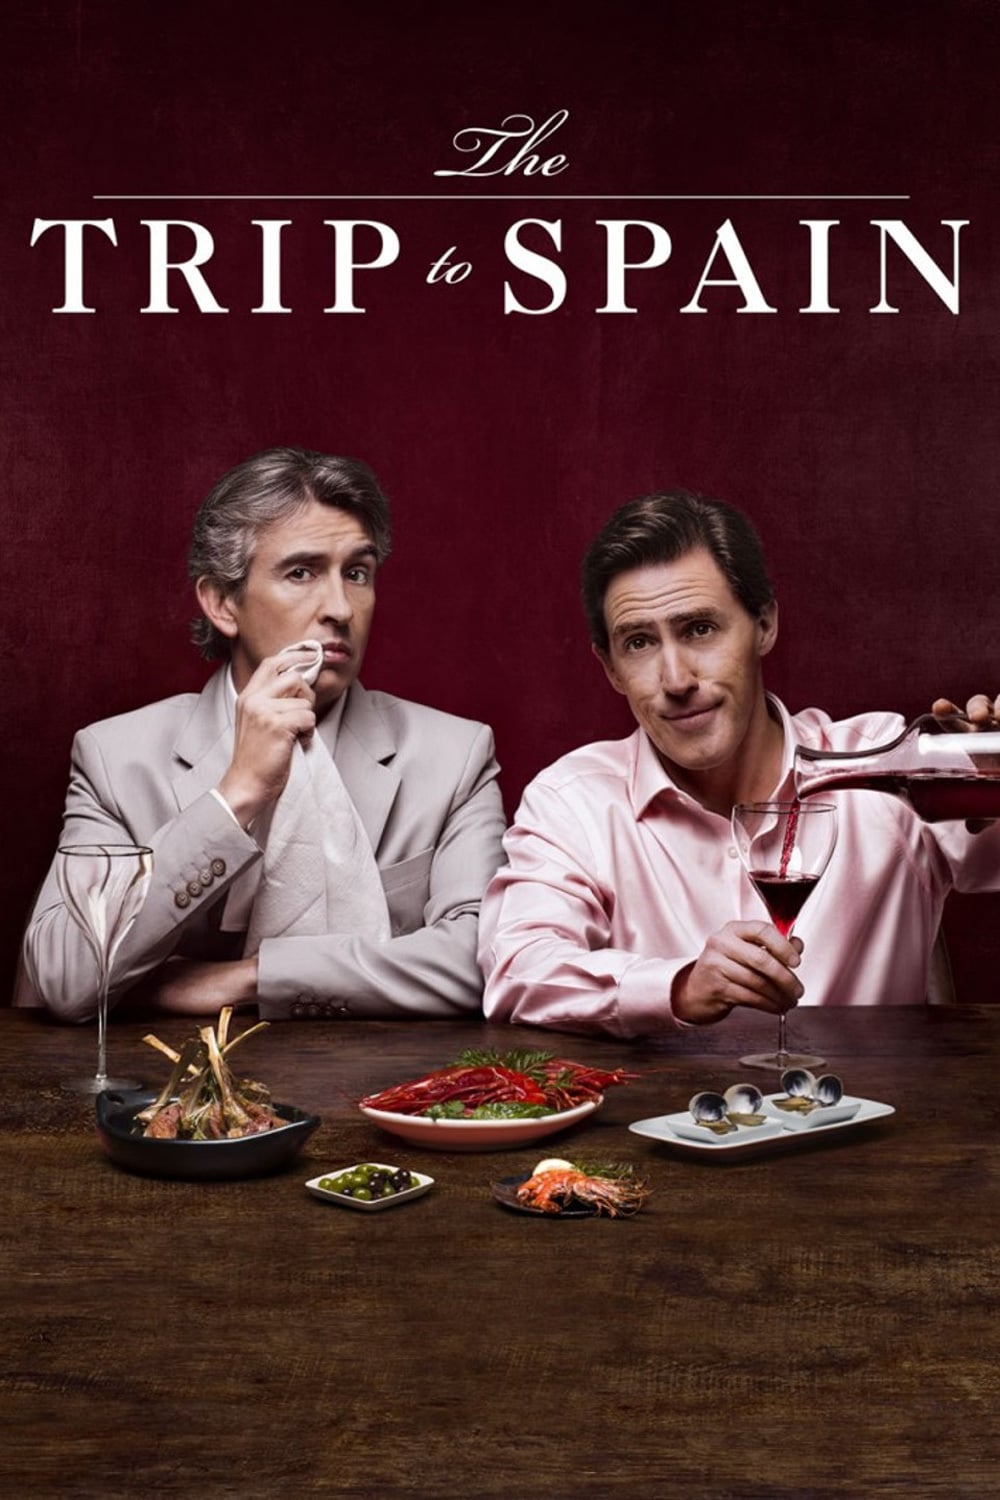 Poster for the movie "The Trip to Spain"